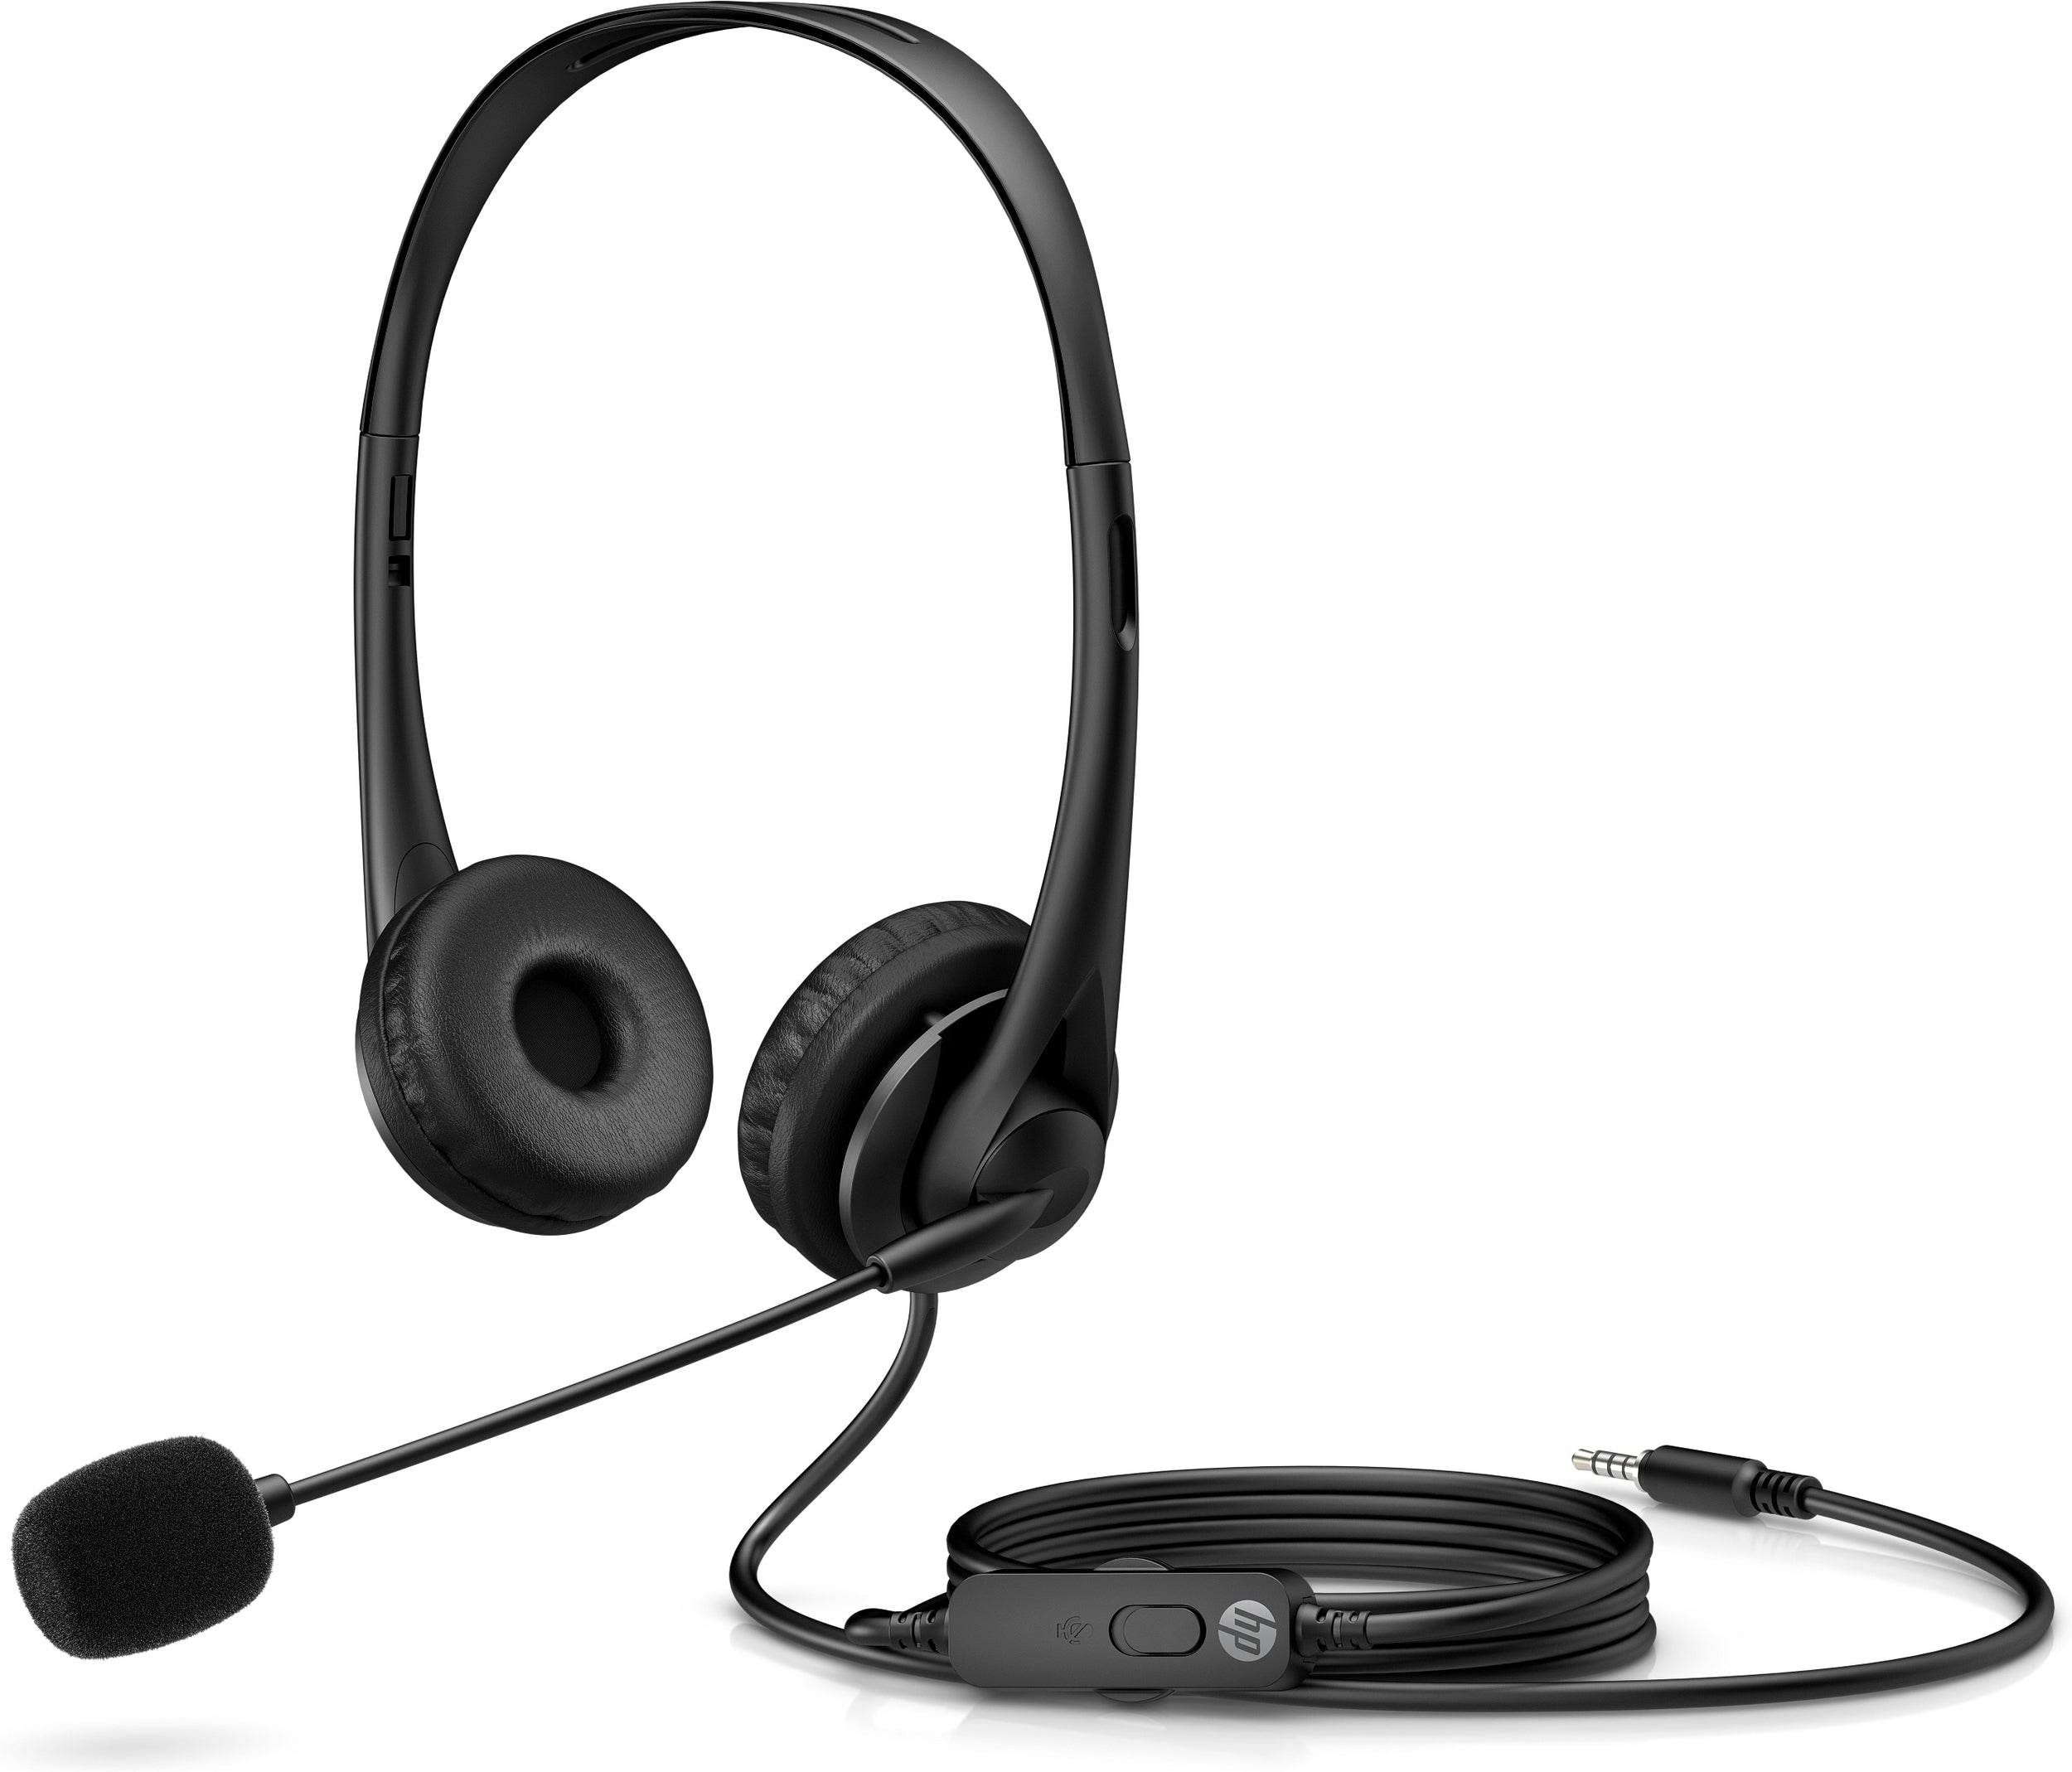 Auriculares 3.5 Mm Estéreo Hp G2 Negro